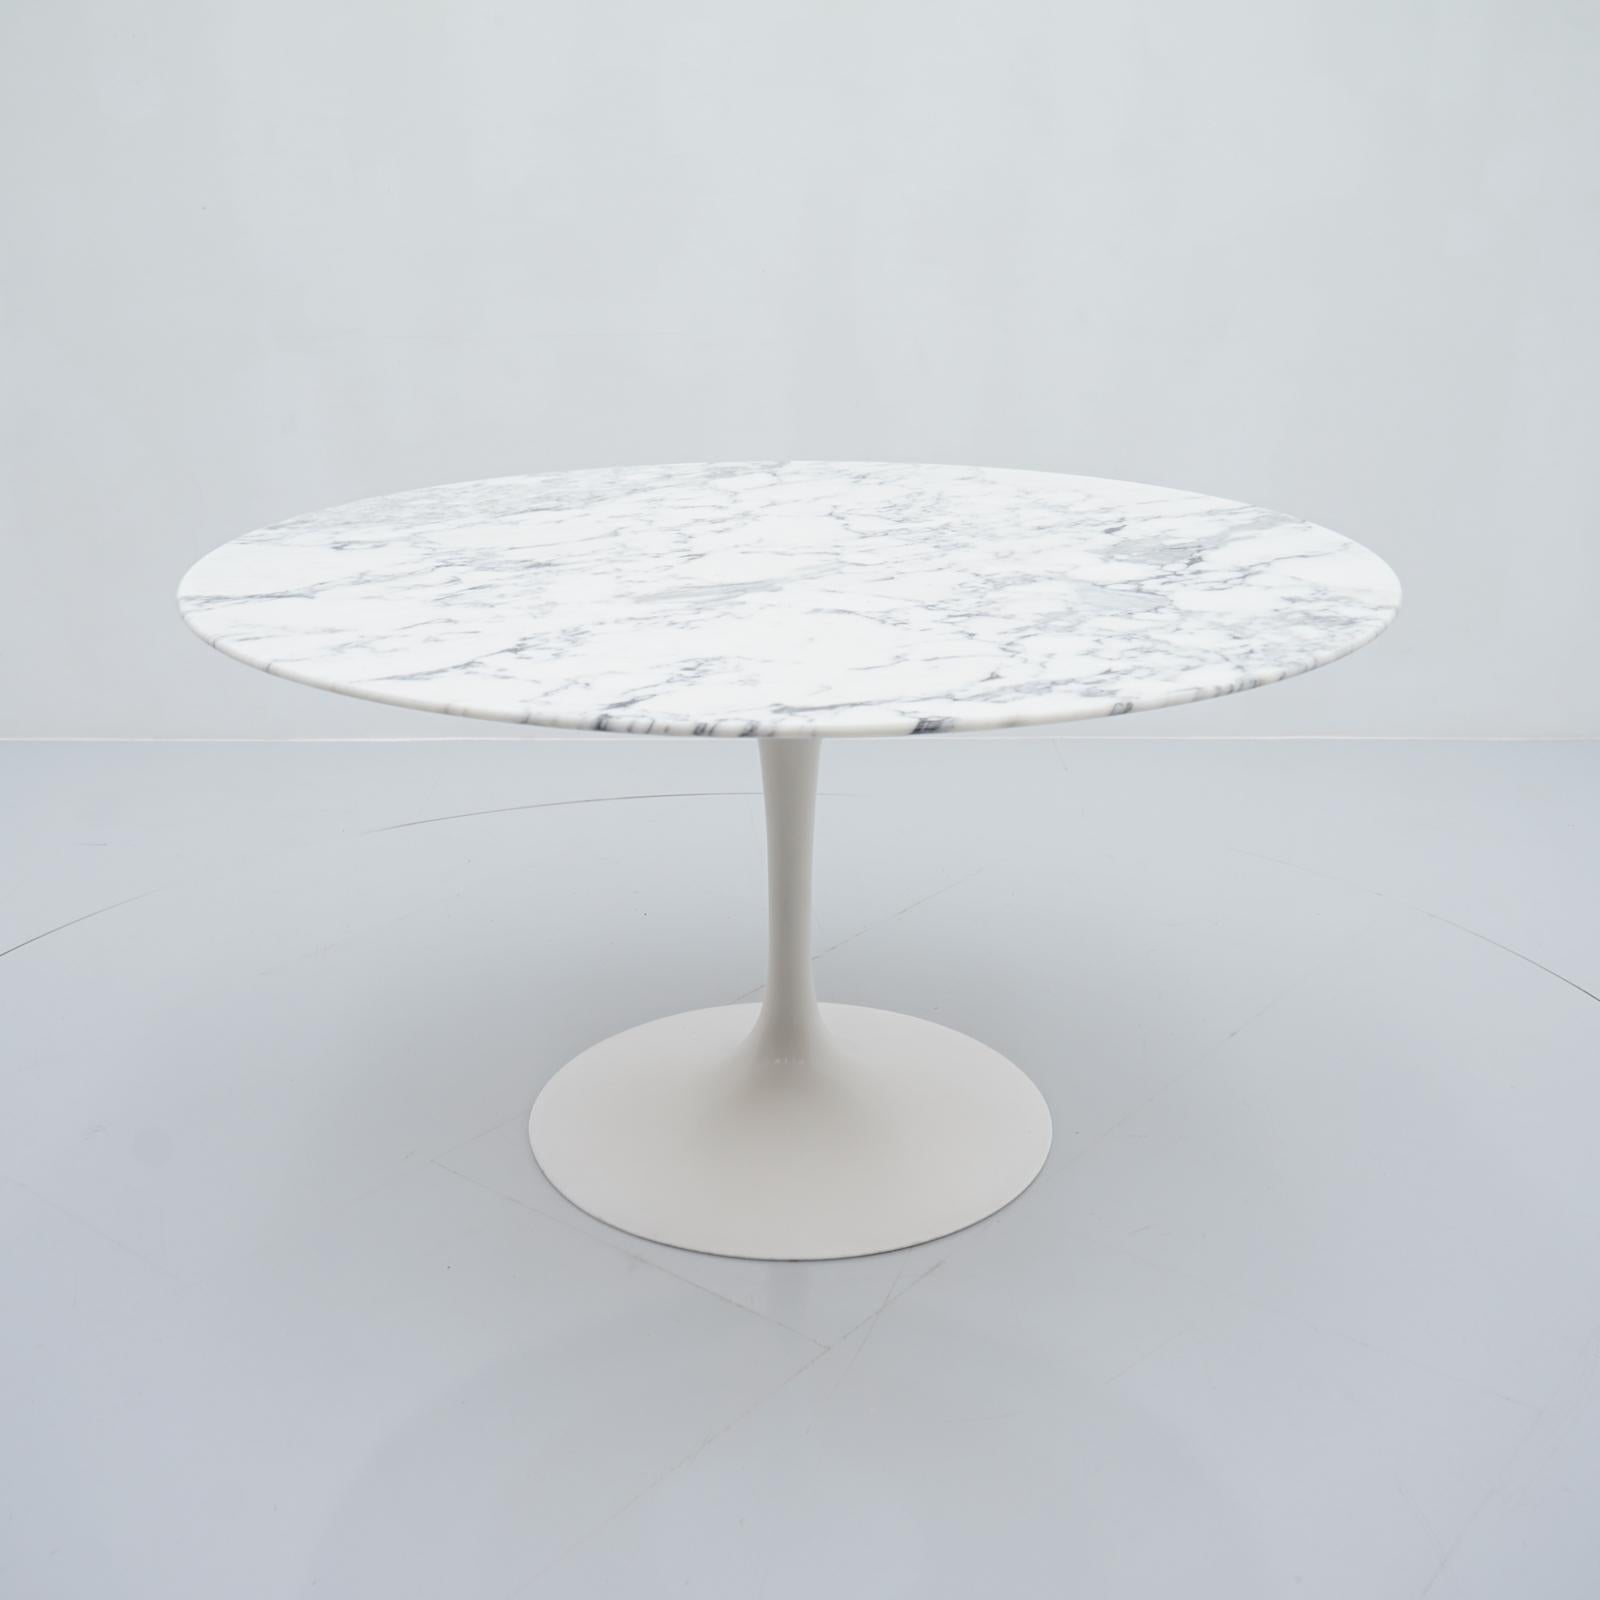 Round Tulip Marble dining table by Eero Saarinen for Knoll International.
Carrara marble top on an Aluminum Tulip base. The table was purchased in the 1970s. The condition is very good. 



Details

Creator: Knoll Int. (Maker), Eero Saarinen